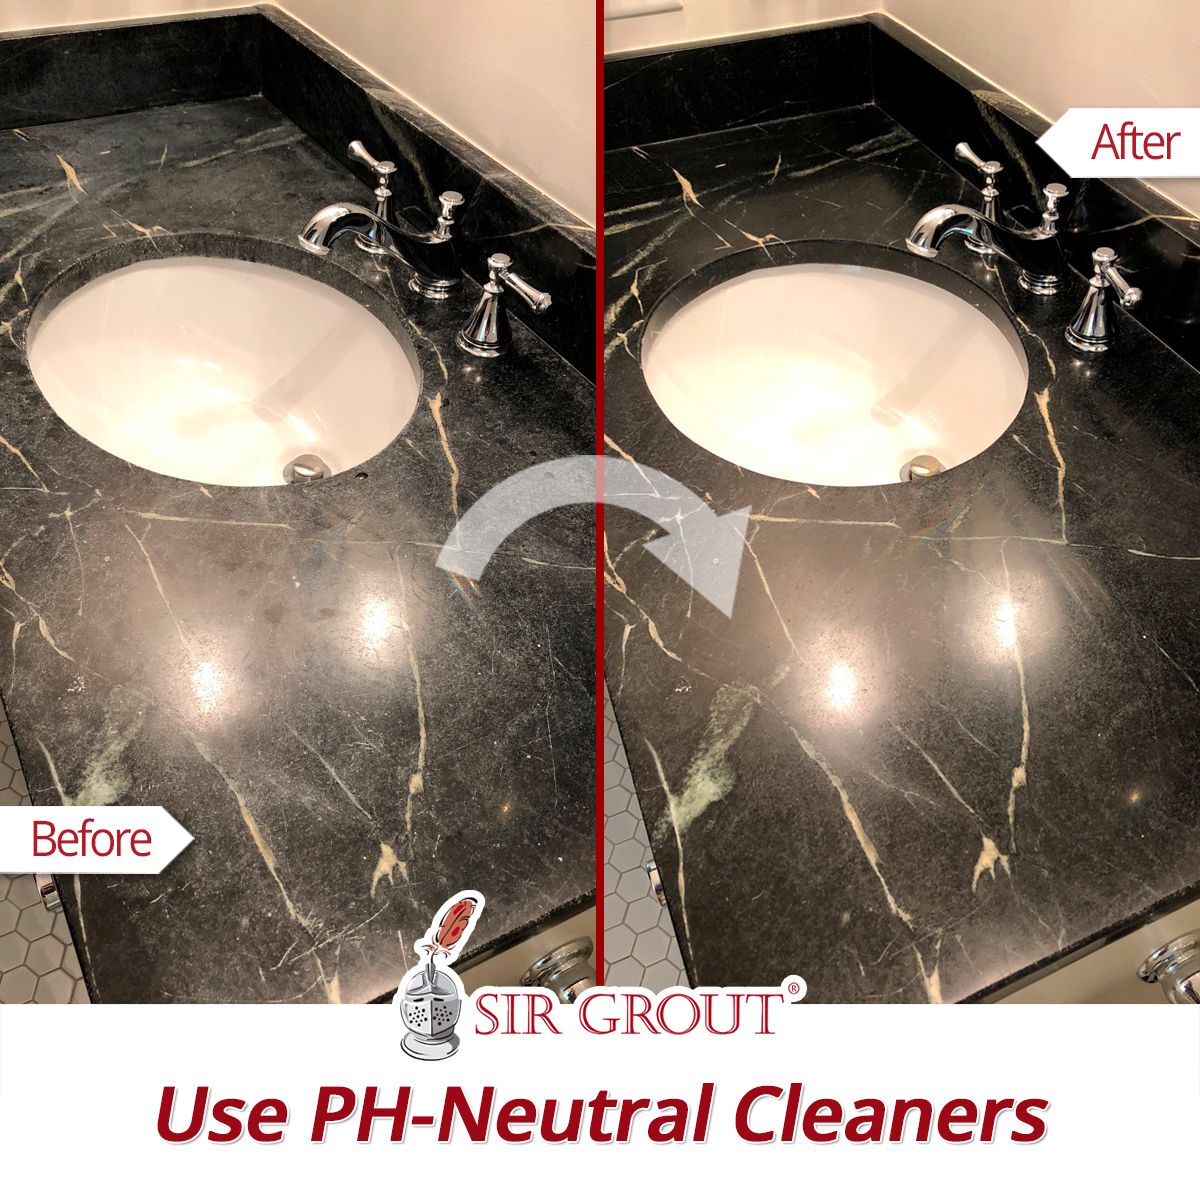 Use PH-Neutral Cleaners